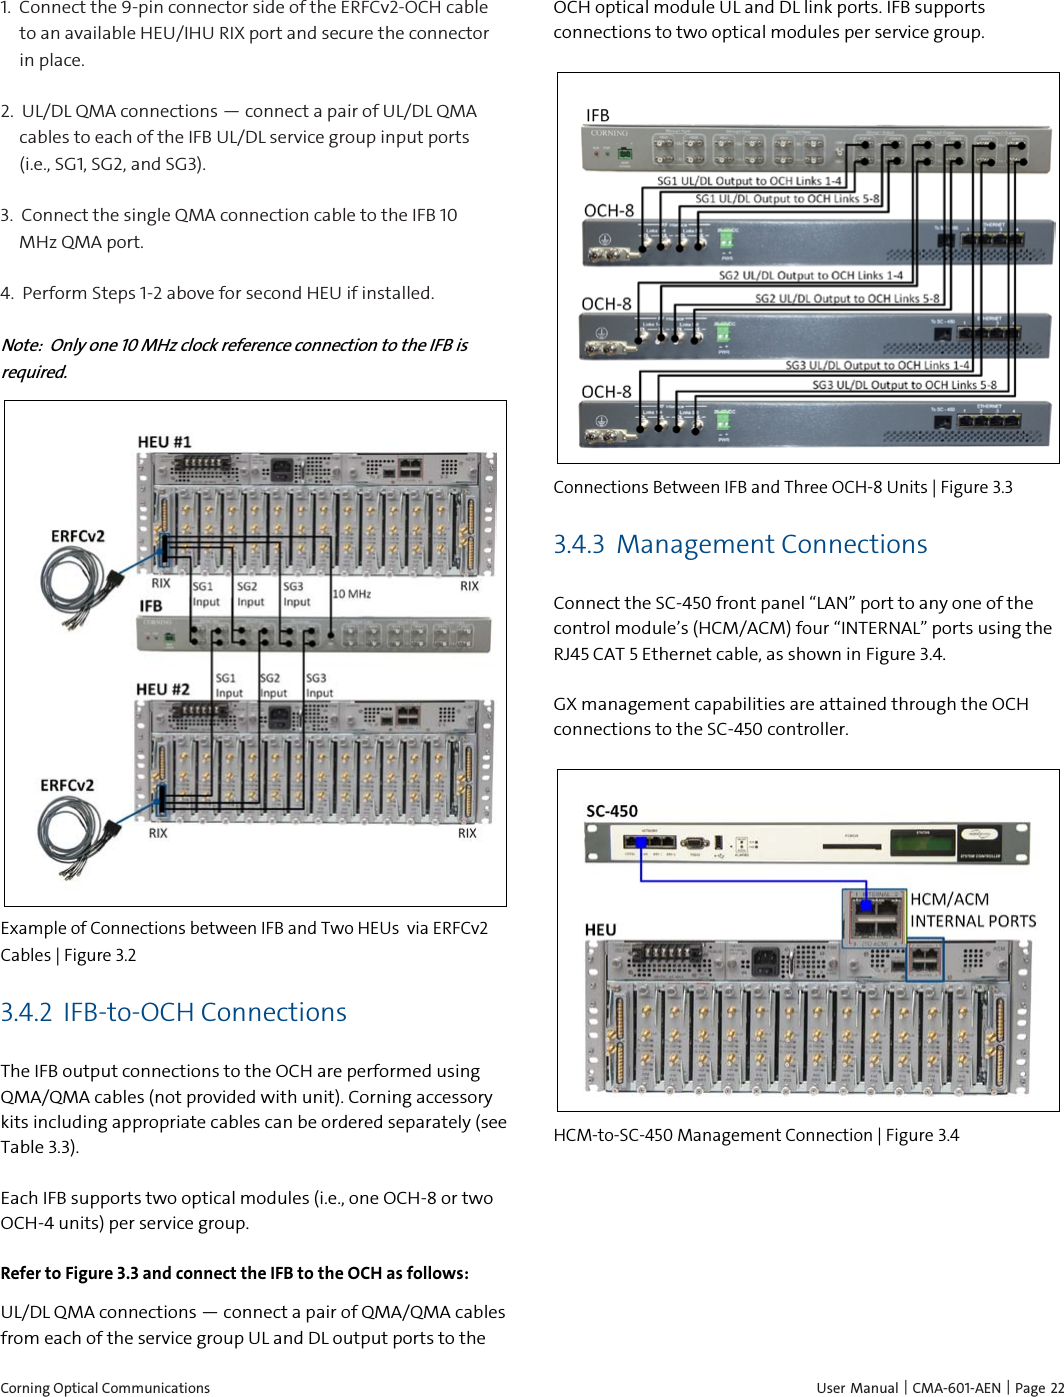  Corning Optical Communications    User Manual | CMA-601-AEN |  Page 22 1.  Connect the 9-pin connector side of the ERFCv2-OCH cable to an available HEU/IHU RIX port and secure the connector in place. 2.  UL/DL QMA connections — connect a pair of UL/DL QMA cables to each of the IFB UL/DL service group input ports (i.e., SG1, SG2, and SG3). 3.  Connect the single QMA connection cable to the IFB 10 MHz QMA port. 4.  Perform Steps 1-2 above for second HEU if installed. Note:  Only one 10 MHz clock reference connection to the IFB is required.  Example of Connections between IFB and Two HEUs  via ERFCv2 Cables | Figure  3.2 3.4.2 IFB-to-OCH Connections The IFB output connections to the OCH are performed using QMA/QMA cables (not provided with unit). Corning accessory kits including appropriate cables can be ordered separately (see Table 3.3). Each IFB supports two optical modules (i.e., one OCH-8 or two OCH-4 units) per service group. Refer to Figure 3.3 and connect the IFB to the OCH as follows: UL/DL QMA connections — connect a pair of QMA/QMA cables from each of the service group UL and DL output ports to the  OCH optical module UL and DL link ports. IFB supports connections to two optical modules per service group.  Connections Between IFB and Three OCH-8 Units | Figure  3.3 3.4.3 Management Connections Connect the SC-450 front panel “LAN” port to any one of the control module’s (HCM/ACM) four “INTERNAL” ports using the RJ45 CAT 5 Ethernet cable, as shown in Figure 3.4. GX management capabilities are attained through the OCH connections to the SC-450 controller.  HCM-to-SC-450 Management Connection | Figure  3.4   